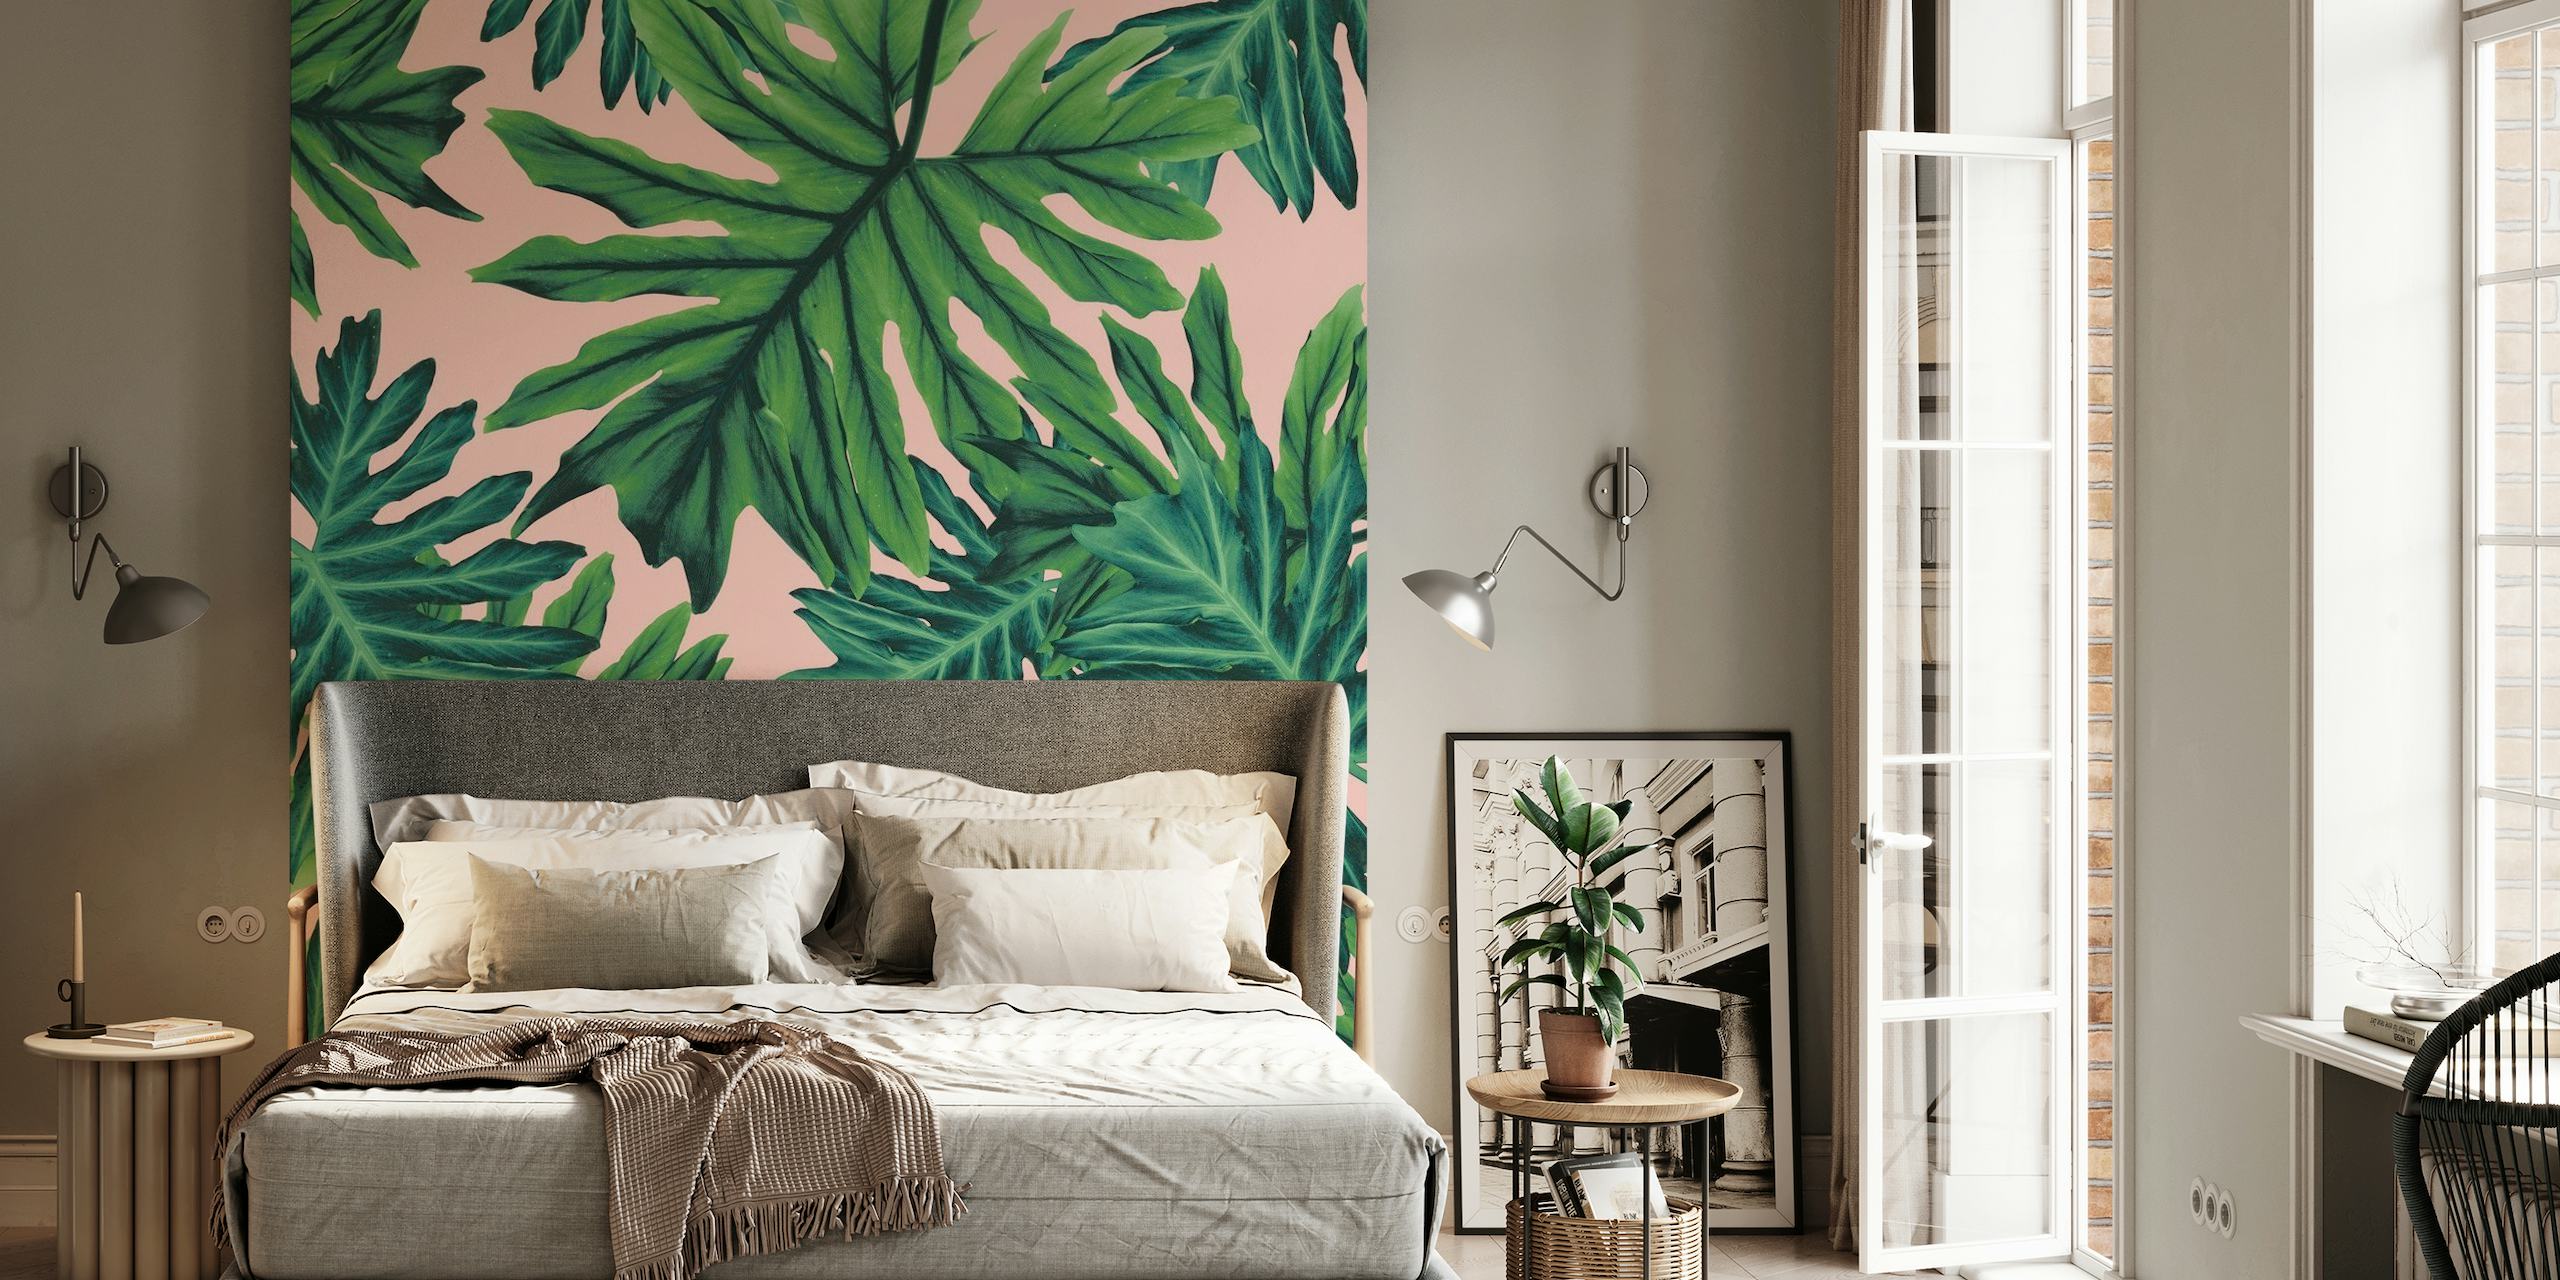 Philo Hope Tropical Jungle 2 wall mural featuring green foliage on a pink background